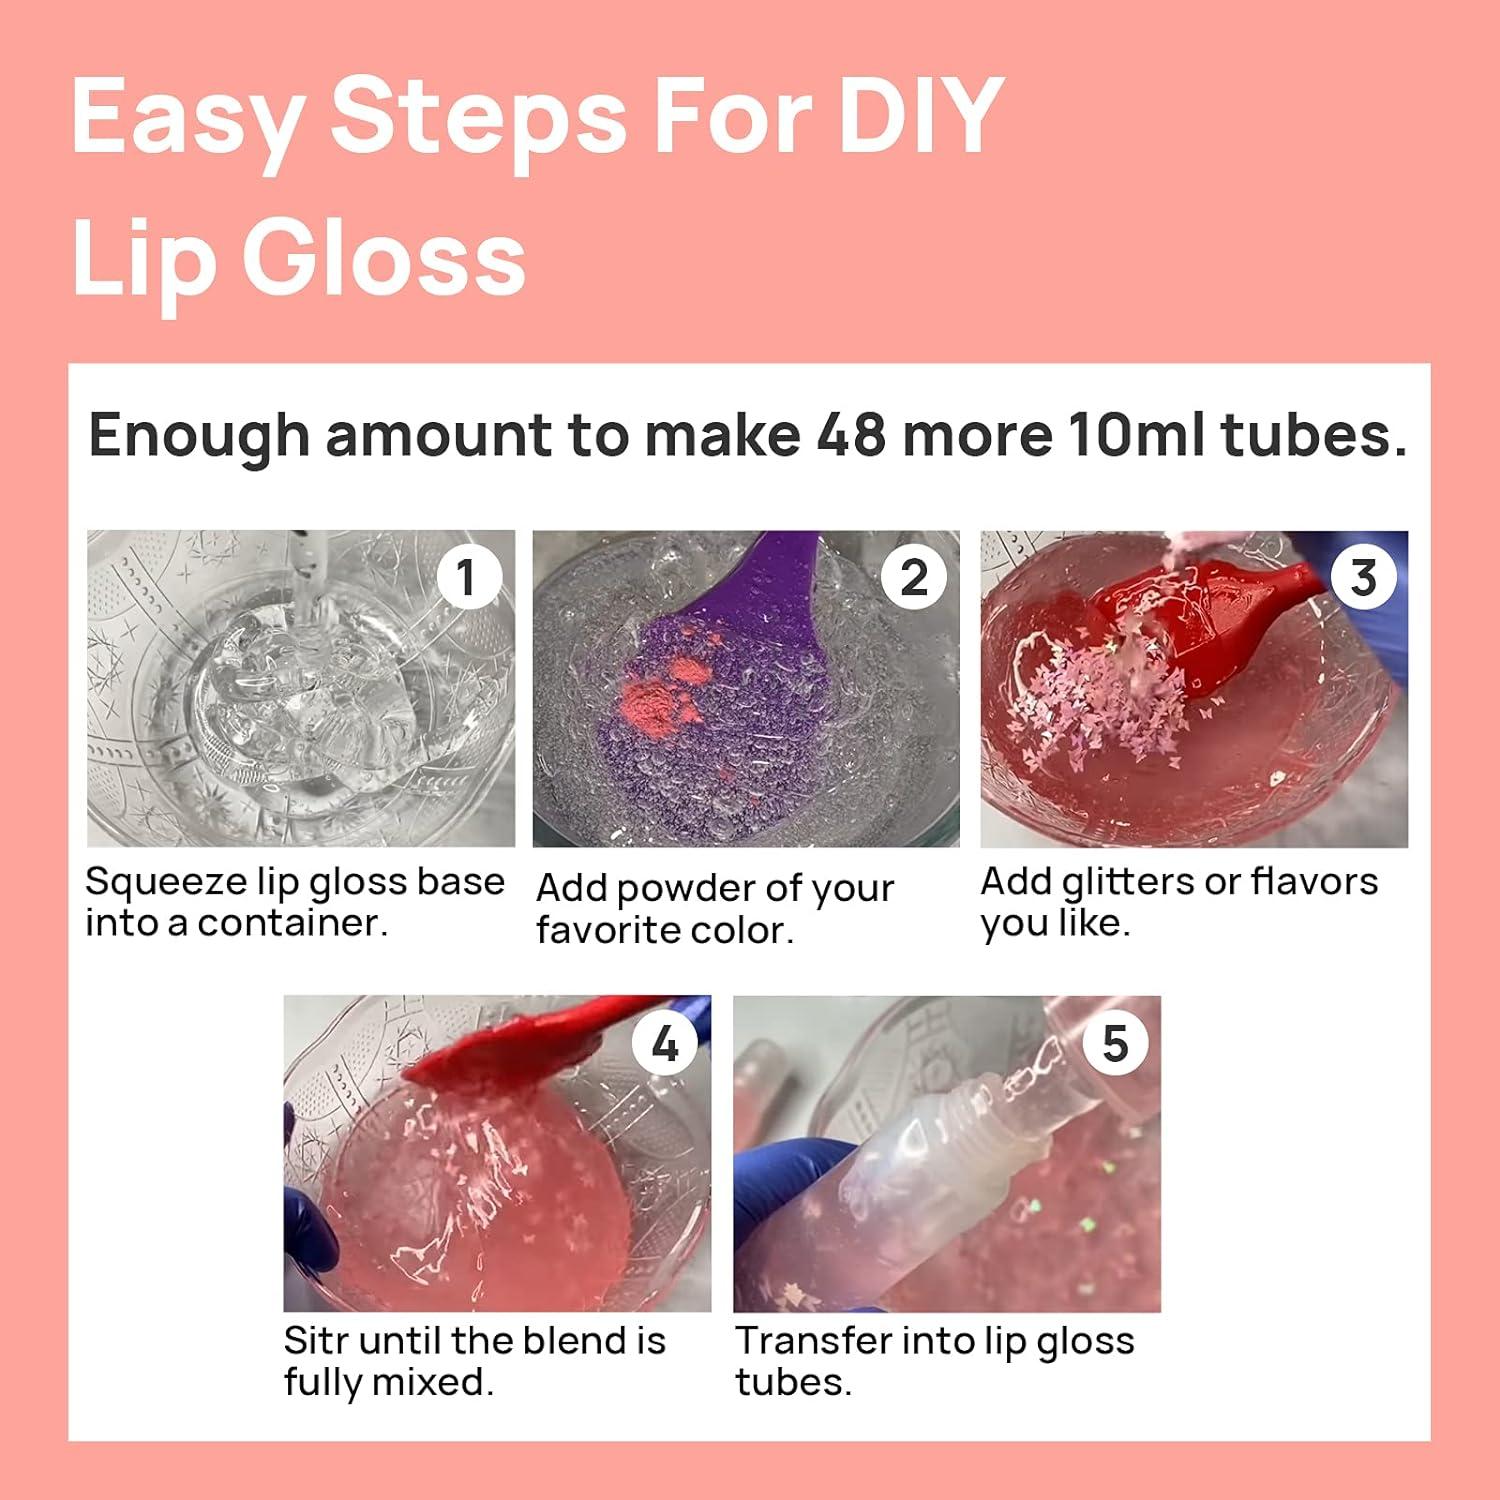 Lip Gloss Base Oil Material, Lip Gloss Base - Clear Base for DIY Lip Gloss, Made in USA Mineral - Oil-Free, Size: 123, White